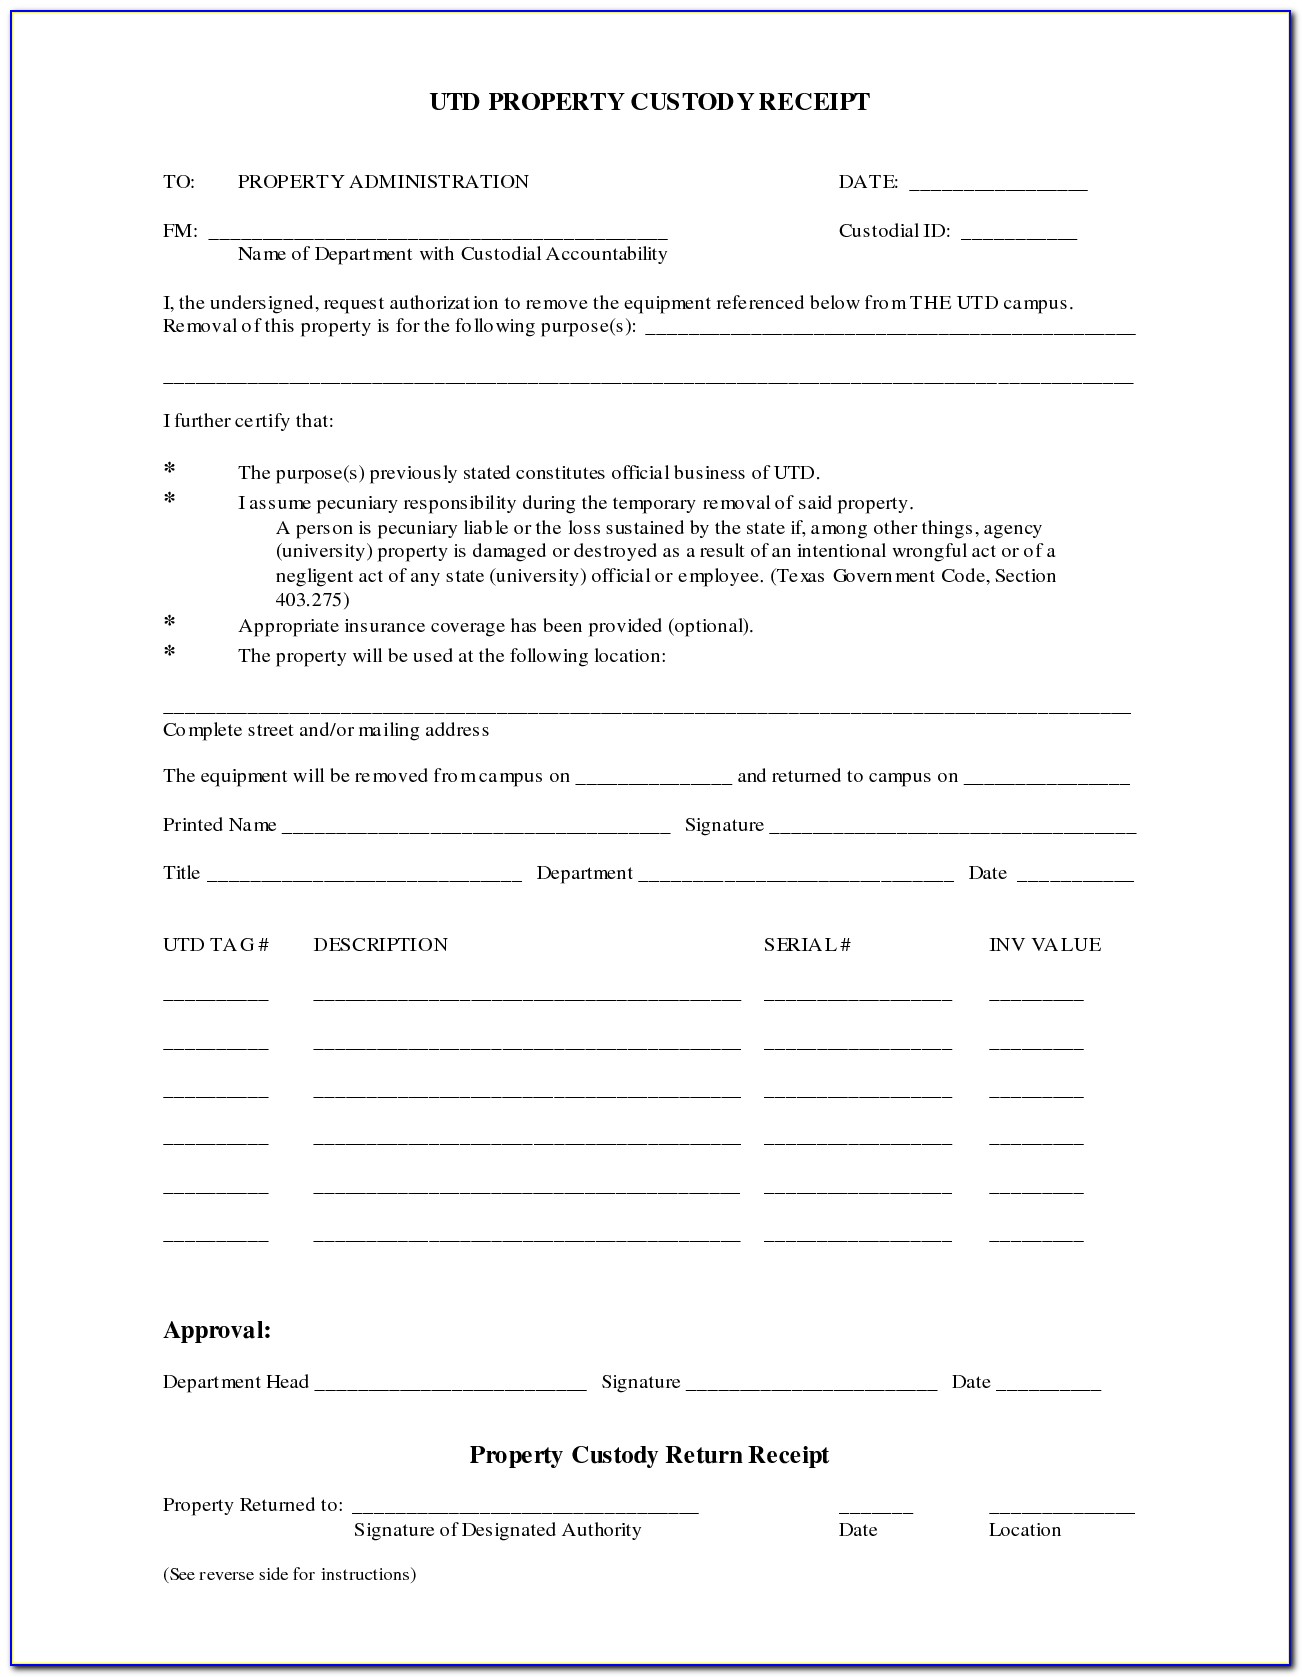 Legal Custody Forms Florida | Create Professional Resumes Online For Free Printable Legal Guardianship Forms